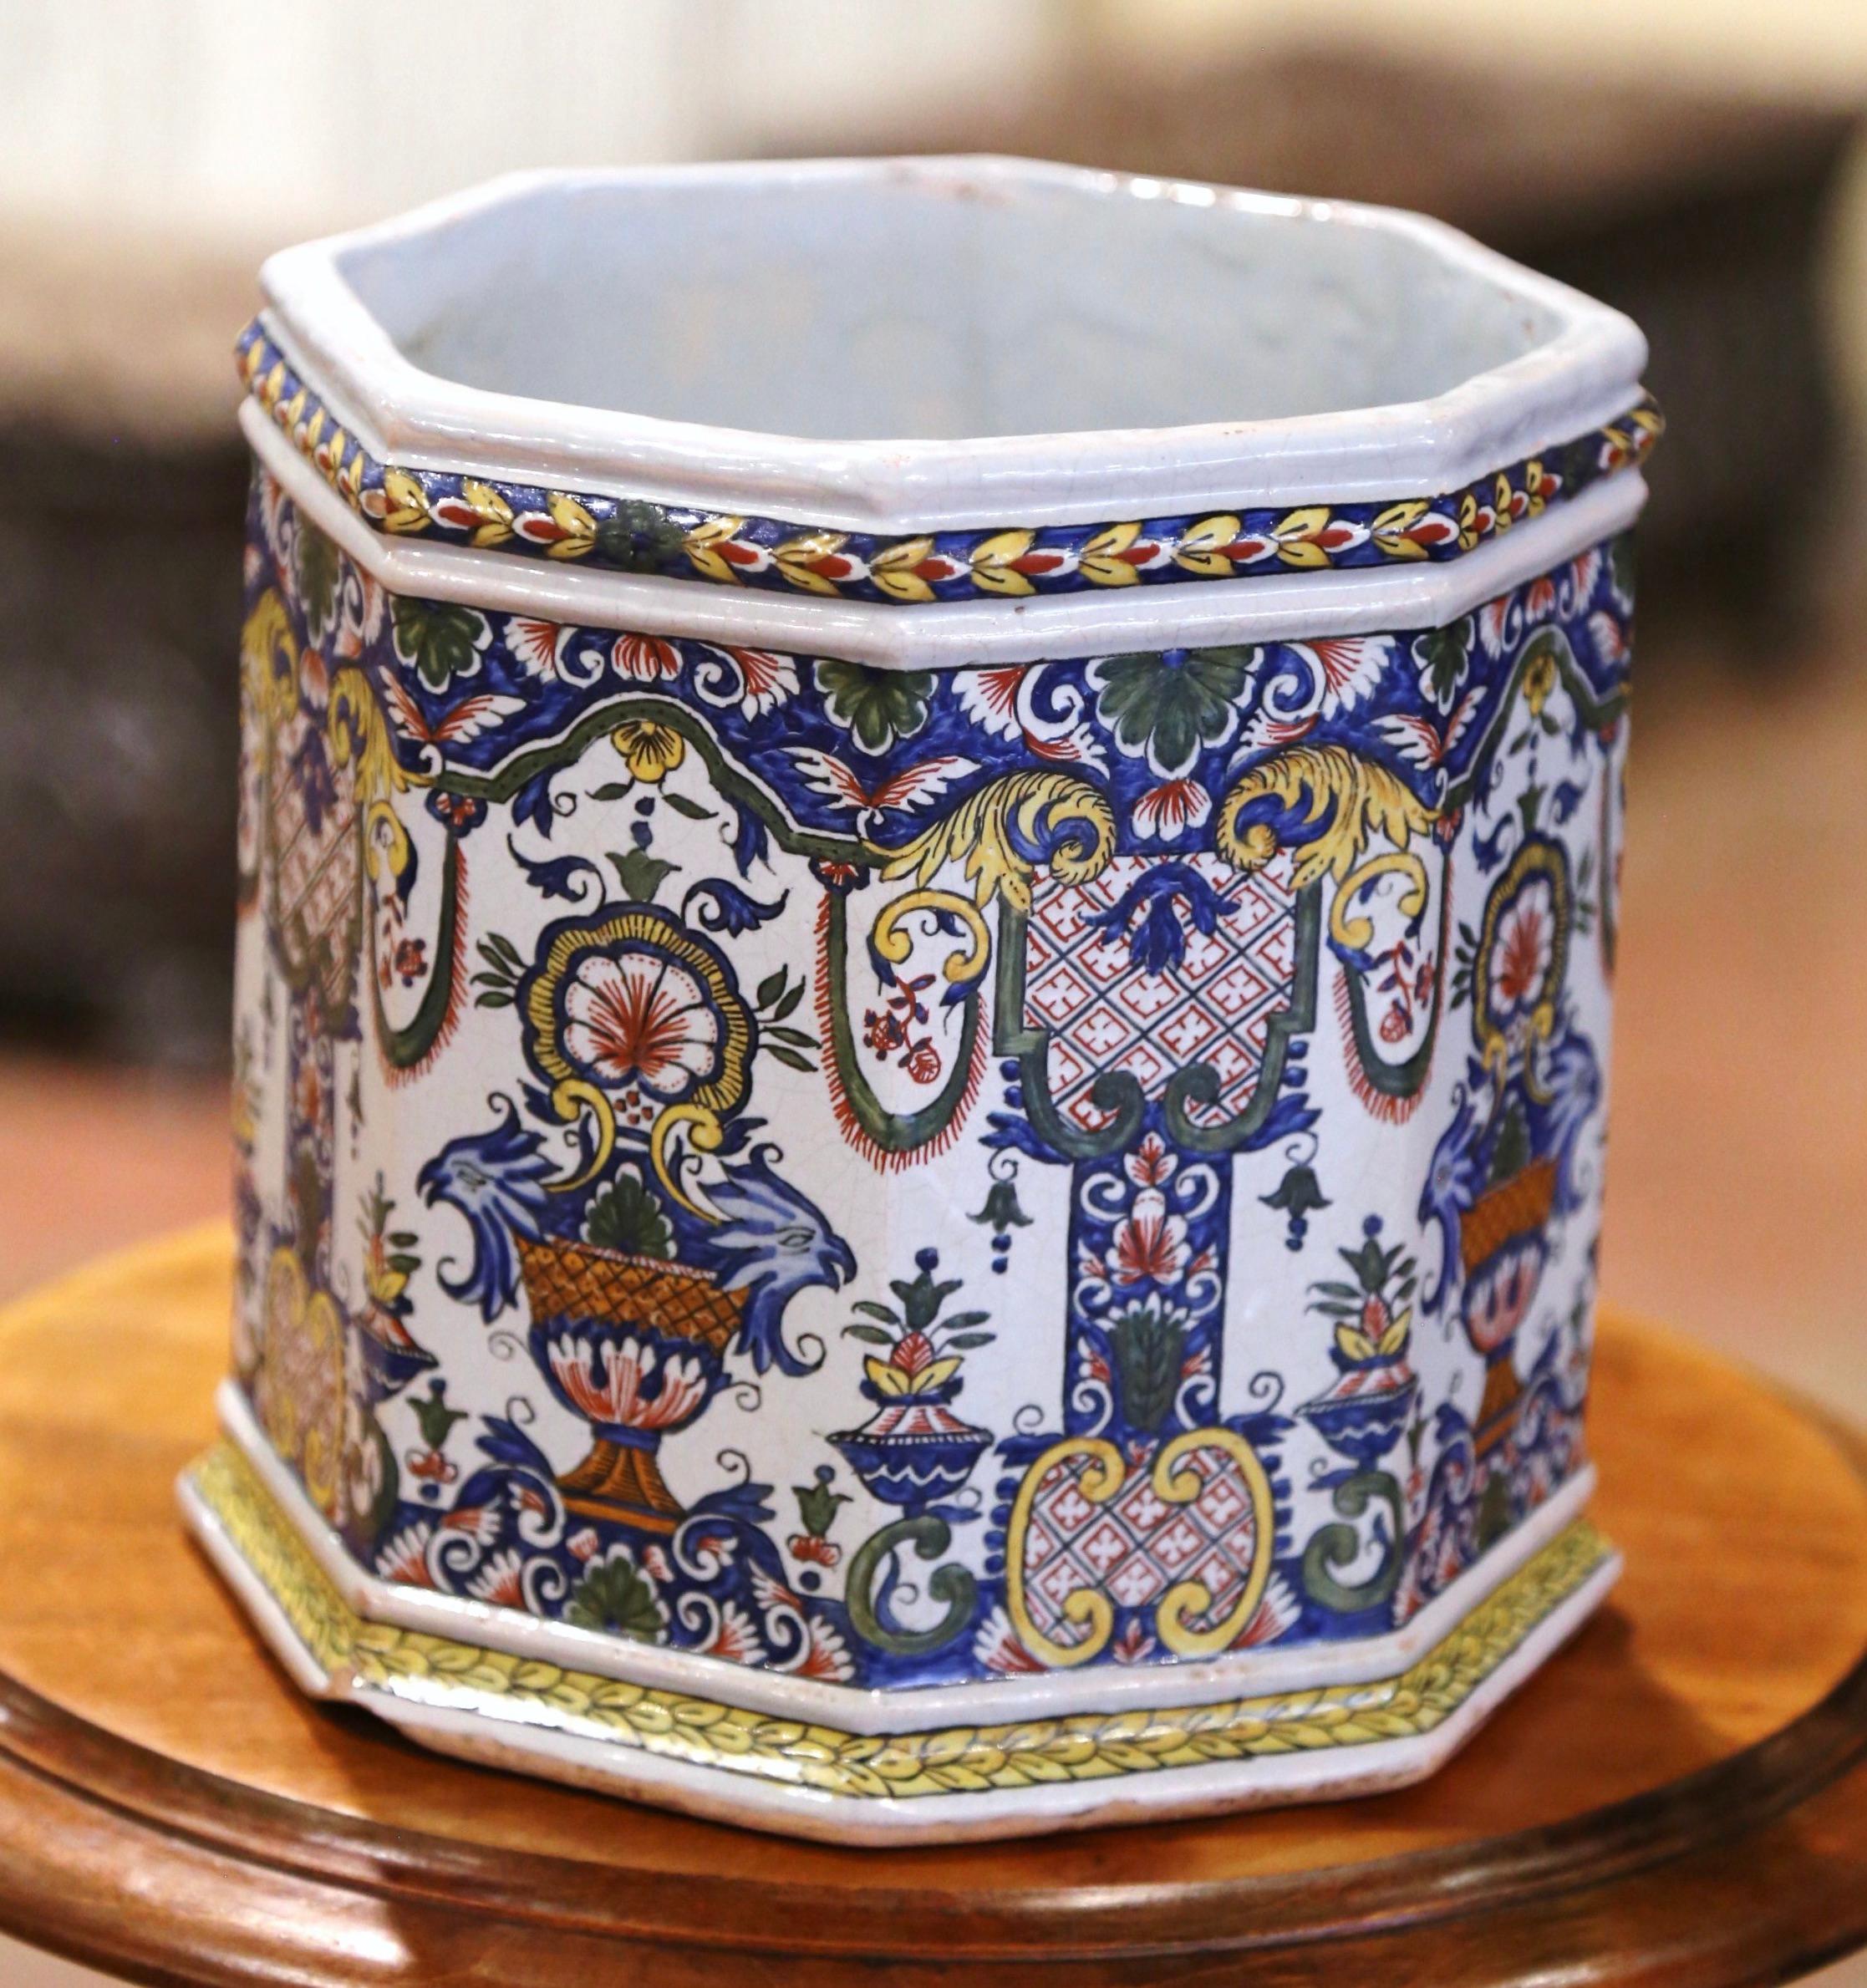 Decorate a mantle, table or buffet with this colorful antique planter. Sculpted in Normandy France circa 1880, and octagonal in shape, the ceramic jardiniere is decorated with hand painted motifs including the Normandy coat of arms, vasiform decor